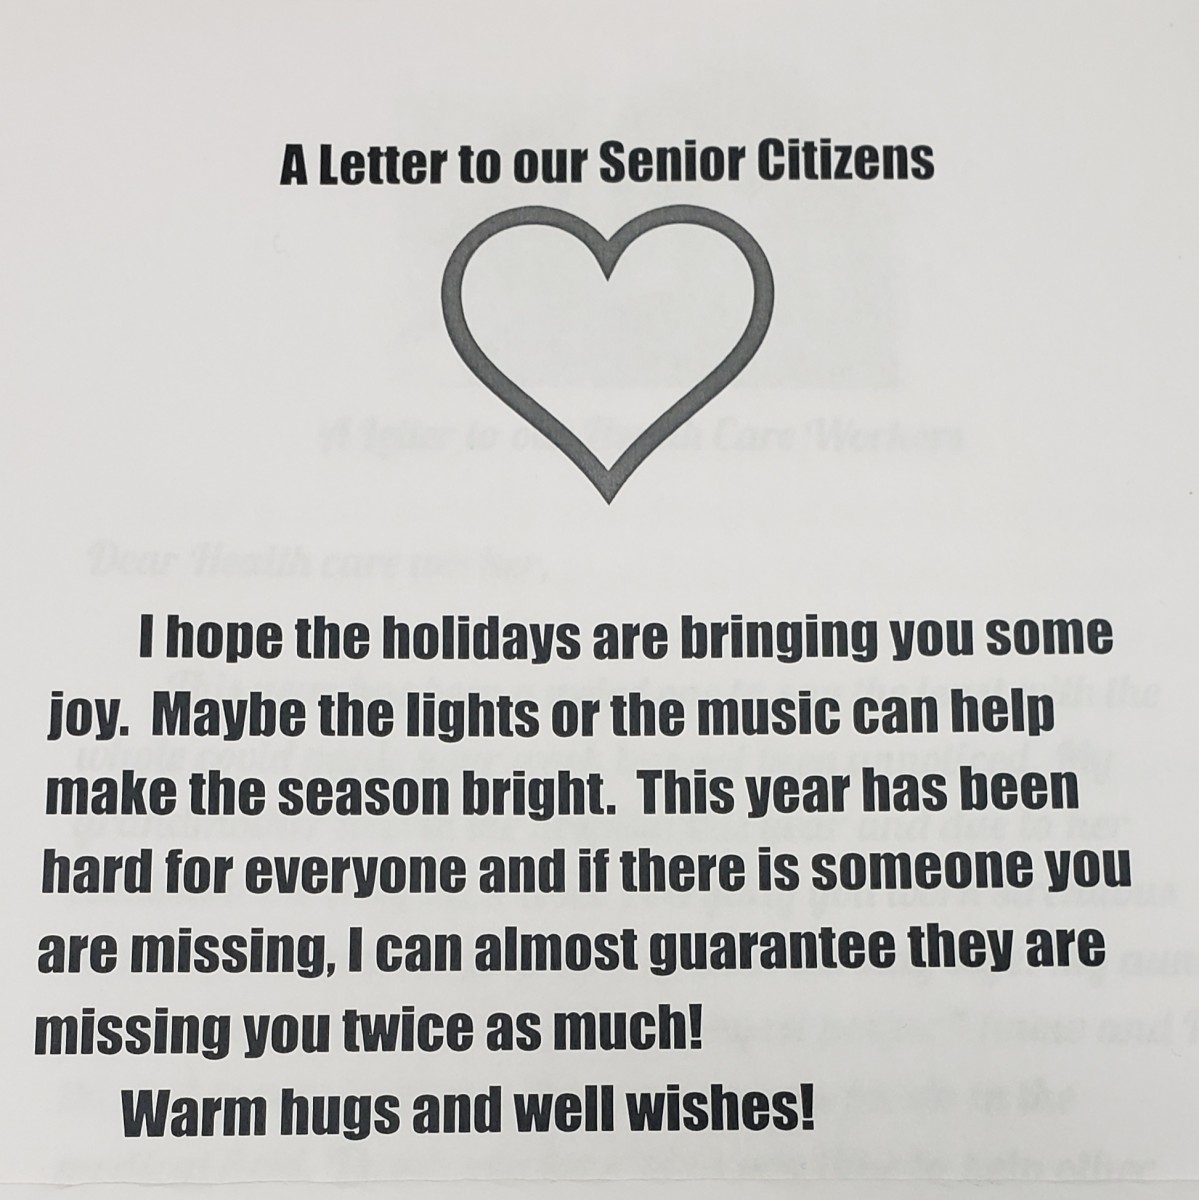 Letter to a senior citizen from an 8th grade scholar at Heritage Middle School.